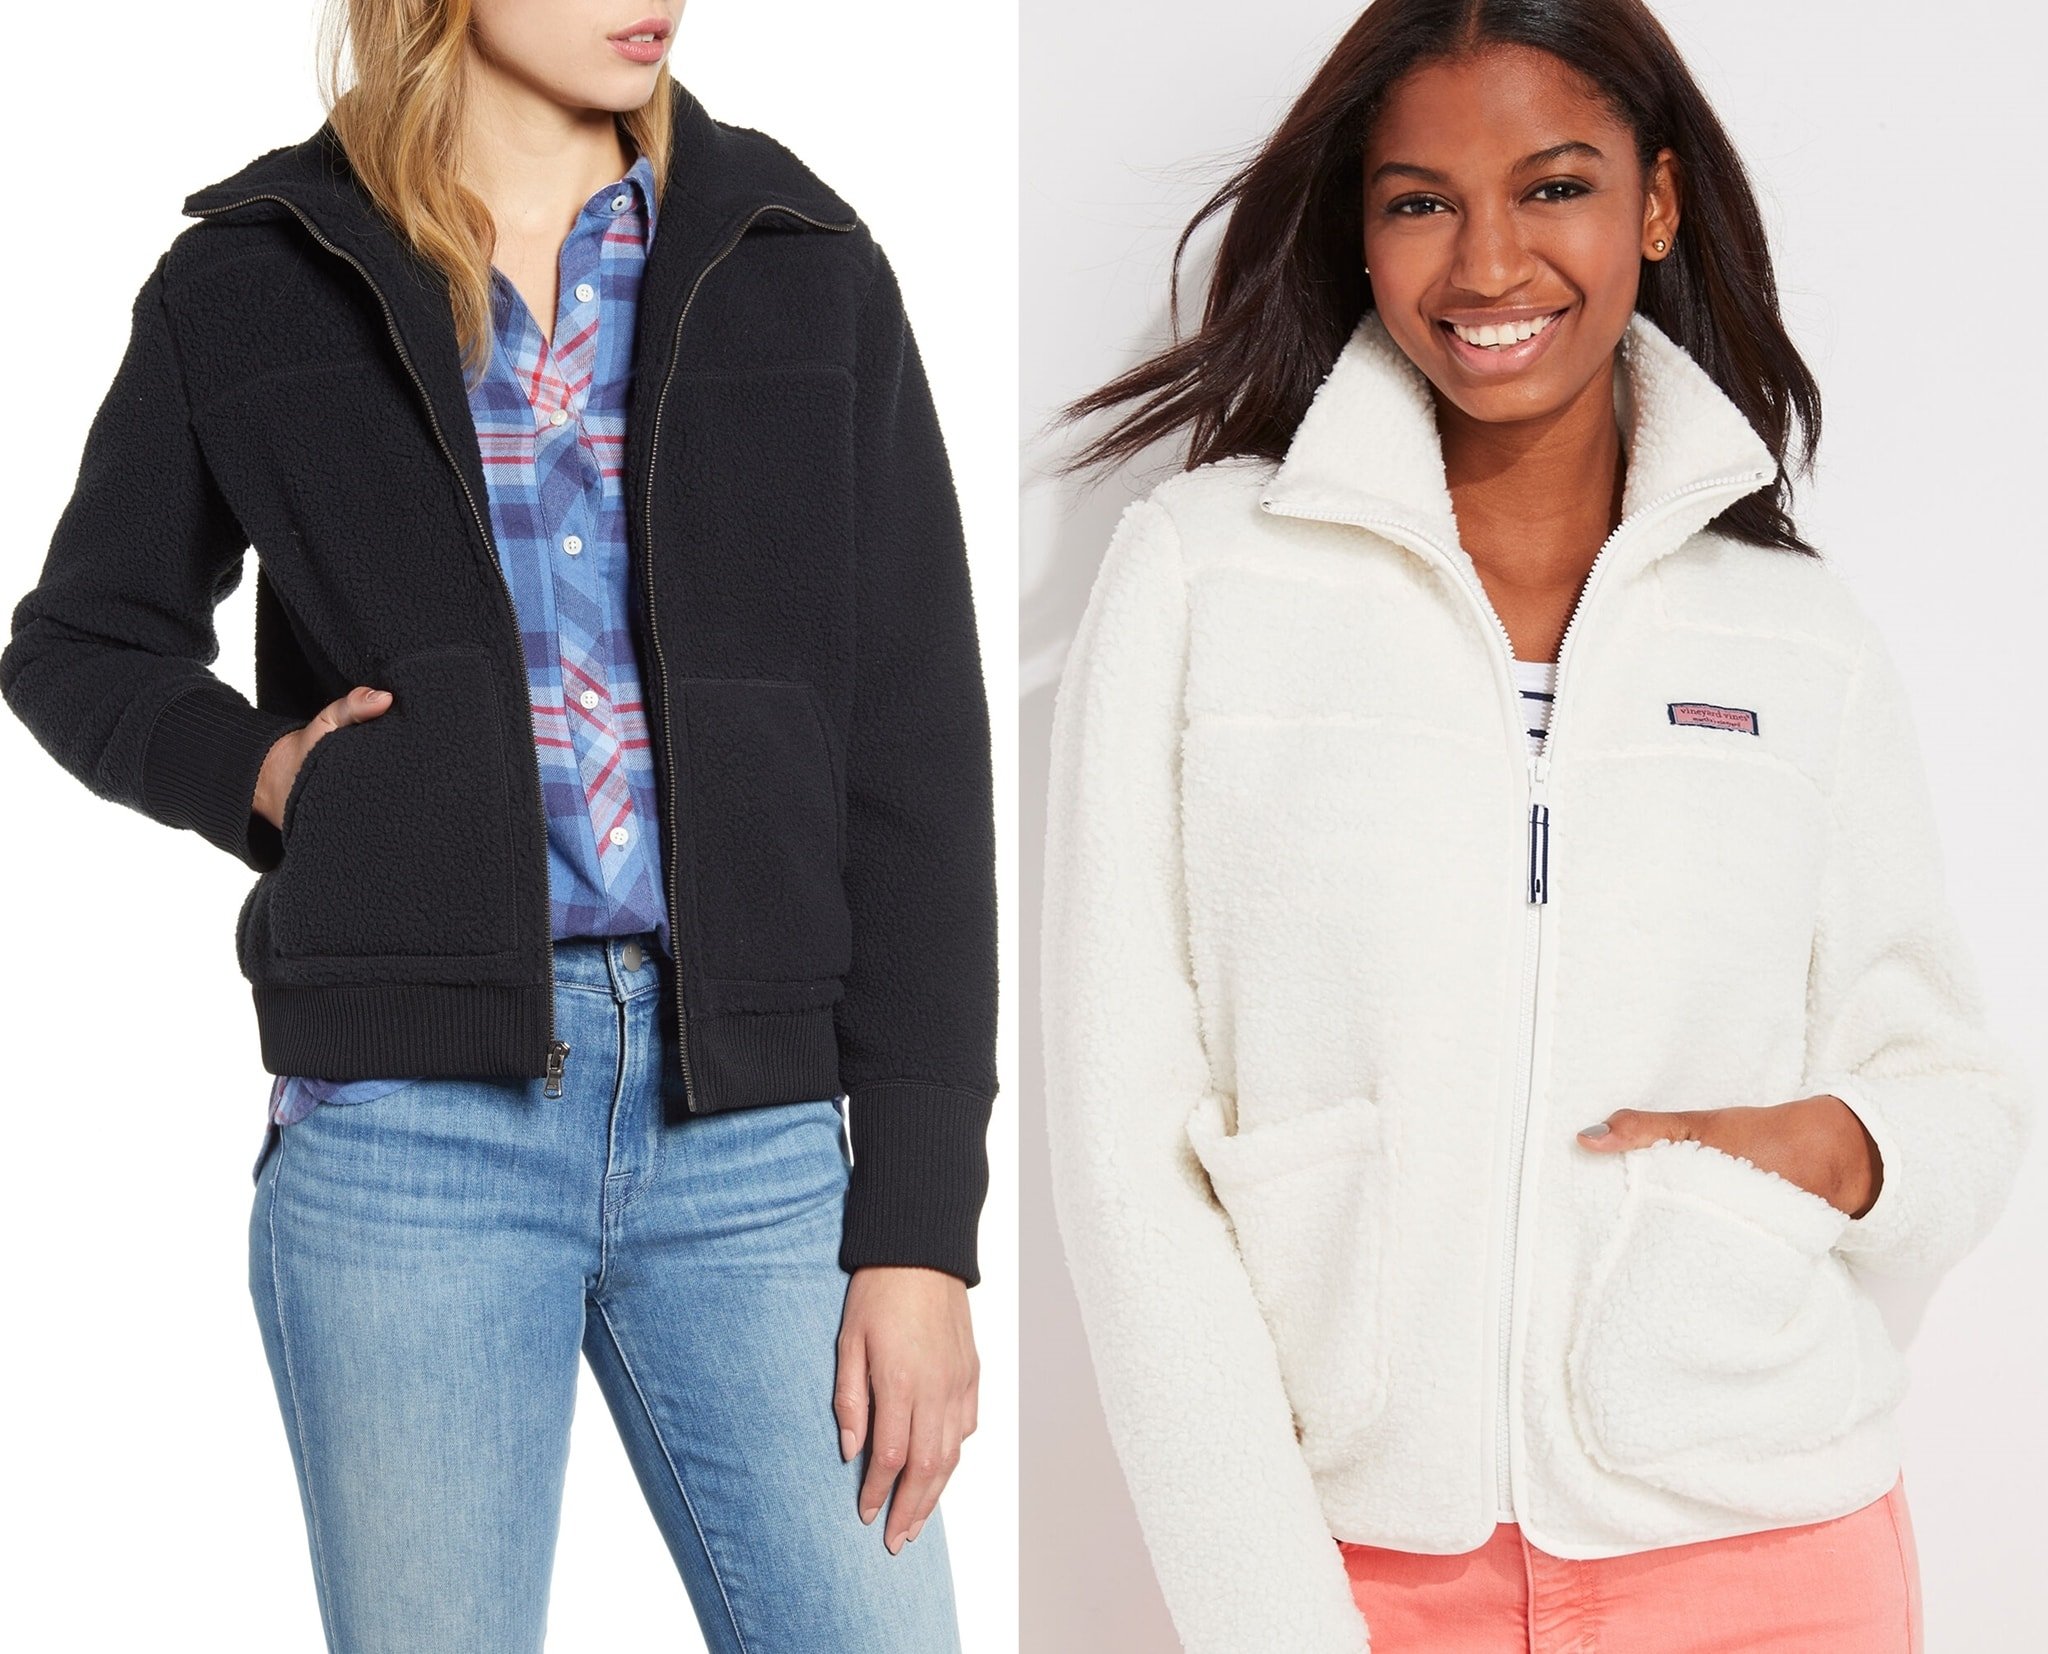 A go-to jacket for Saturdays on the sidelines feels wonderfully cozy inside and out in high-pile fleece with a split kangaroo pocket to keep hands warm